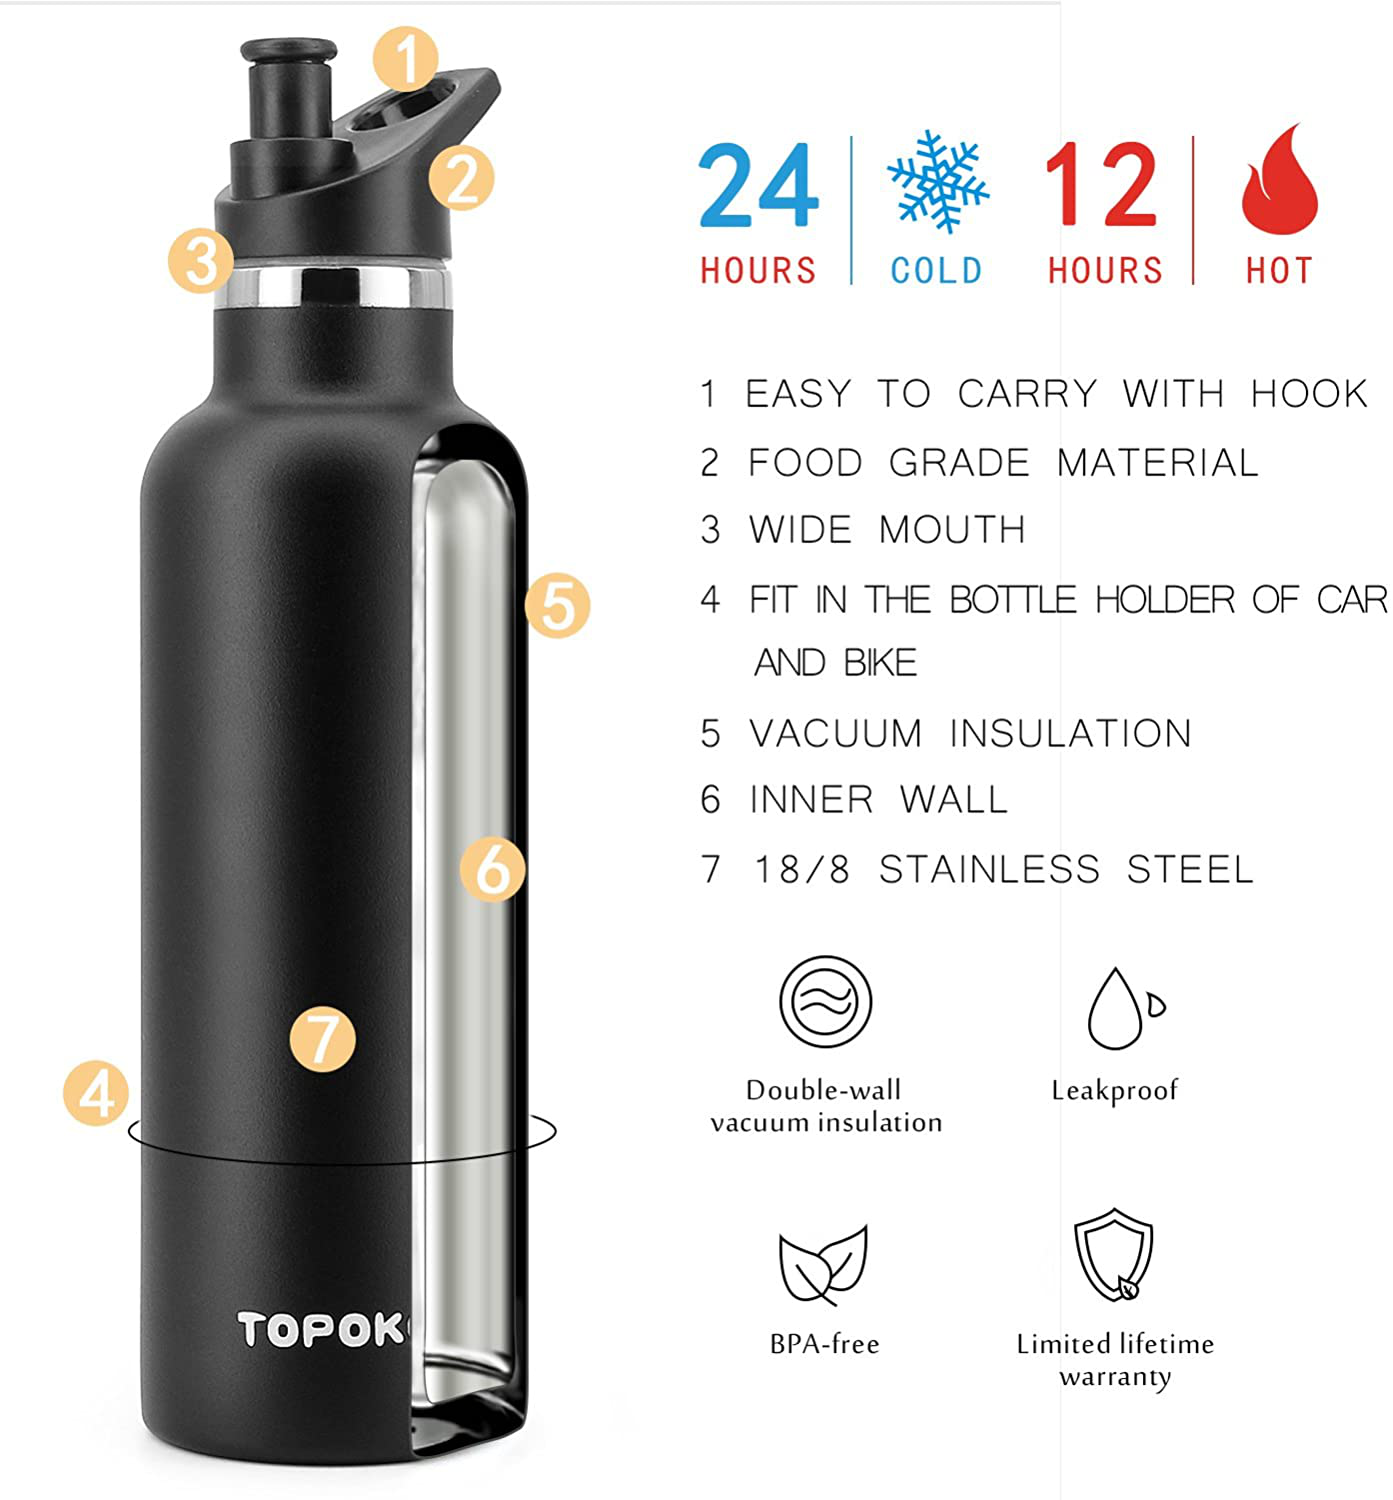 TOPOKO 25 OZ Hydro Double Wall Flask Stainless Steel Water Bottle, Bite Valve Top, Vacuum Insulated, Sweat Proof, Leak Proof Sports Thermos. Standard Mouth 25oz, BPA-Free, Keep Cold 24 Hours (Black)